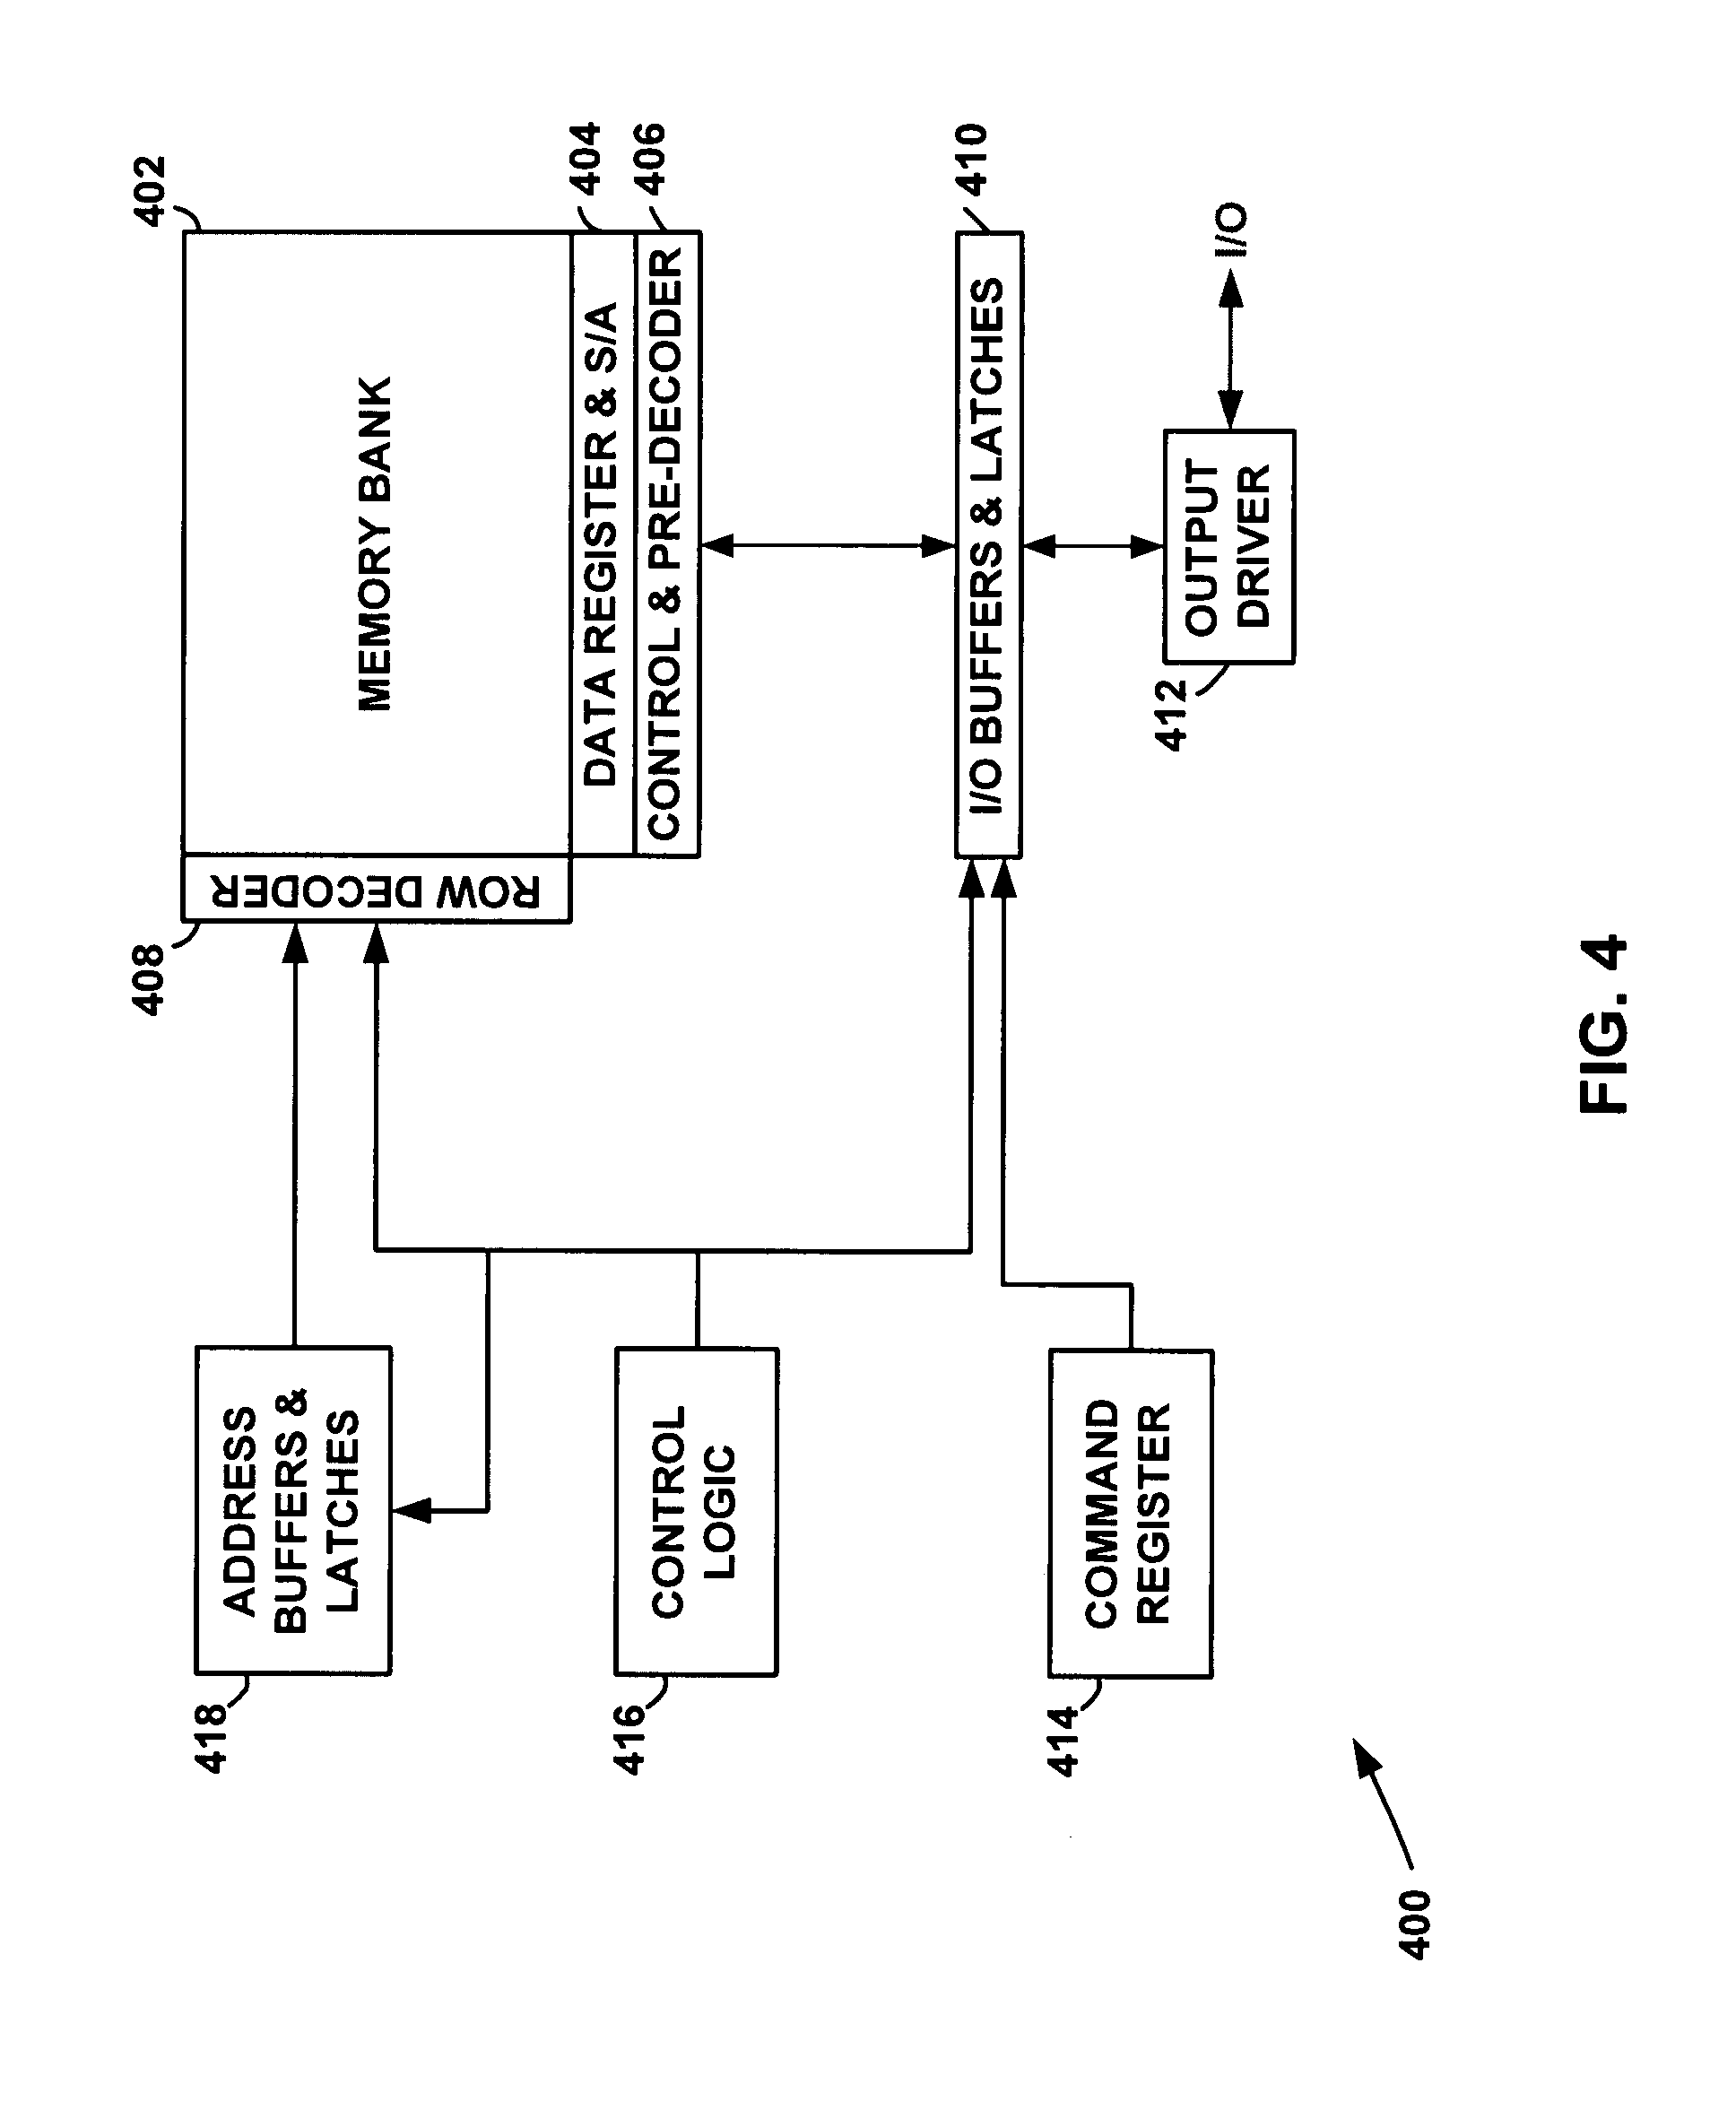 Modular command structure for memory and memory system